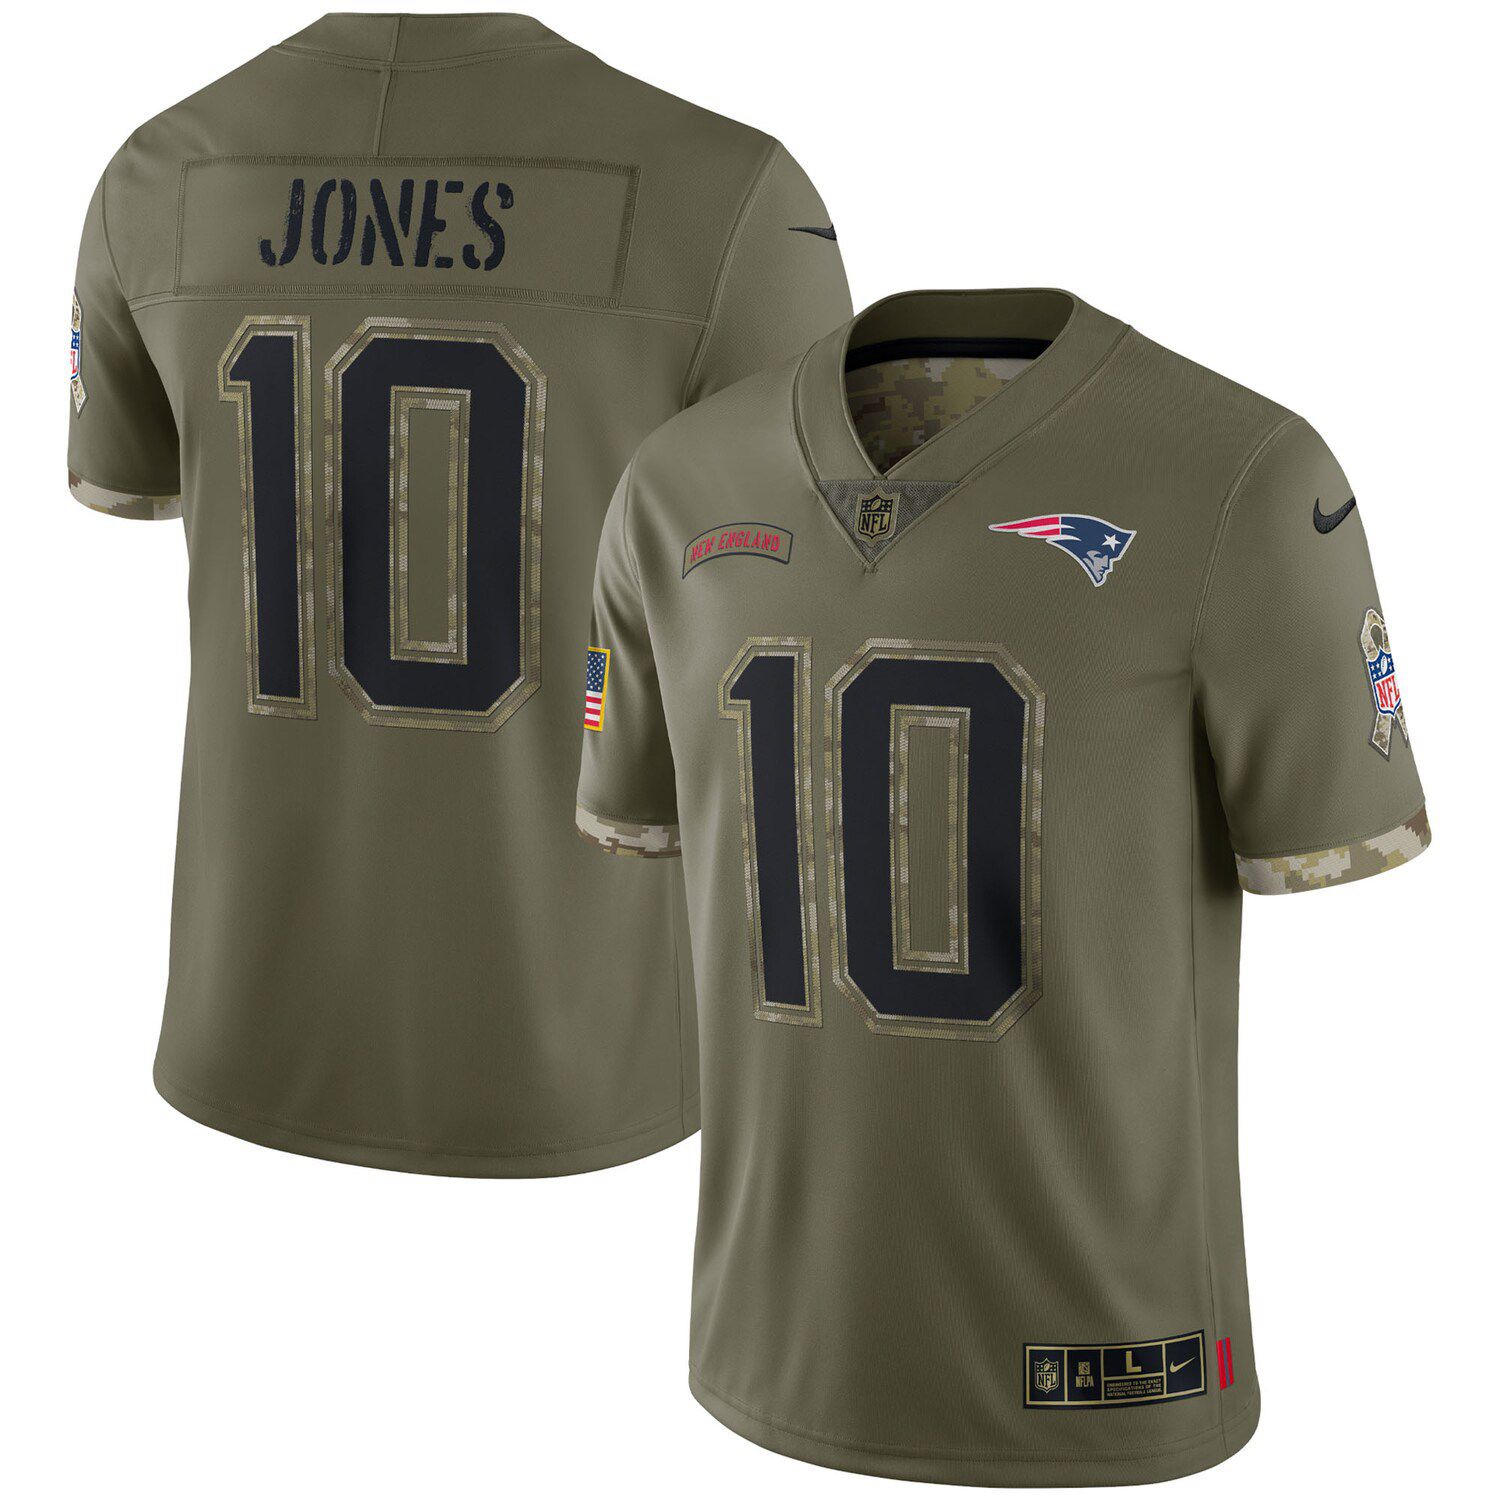 New England Patriots Salute To Service Jersey